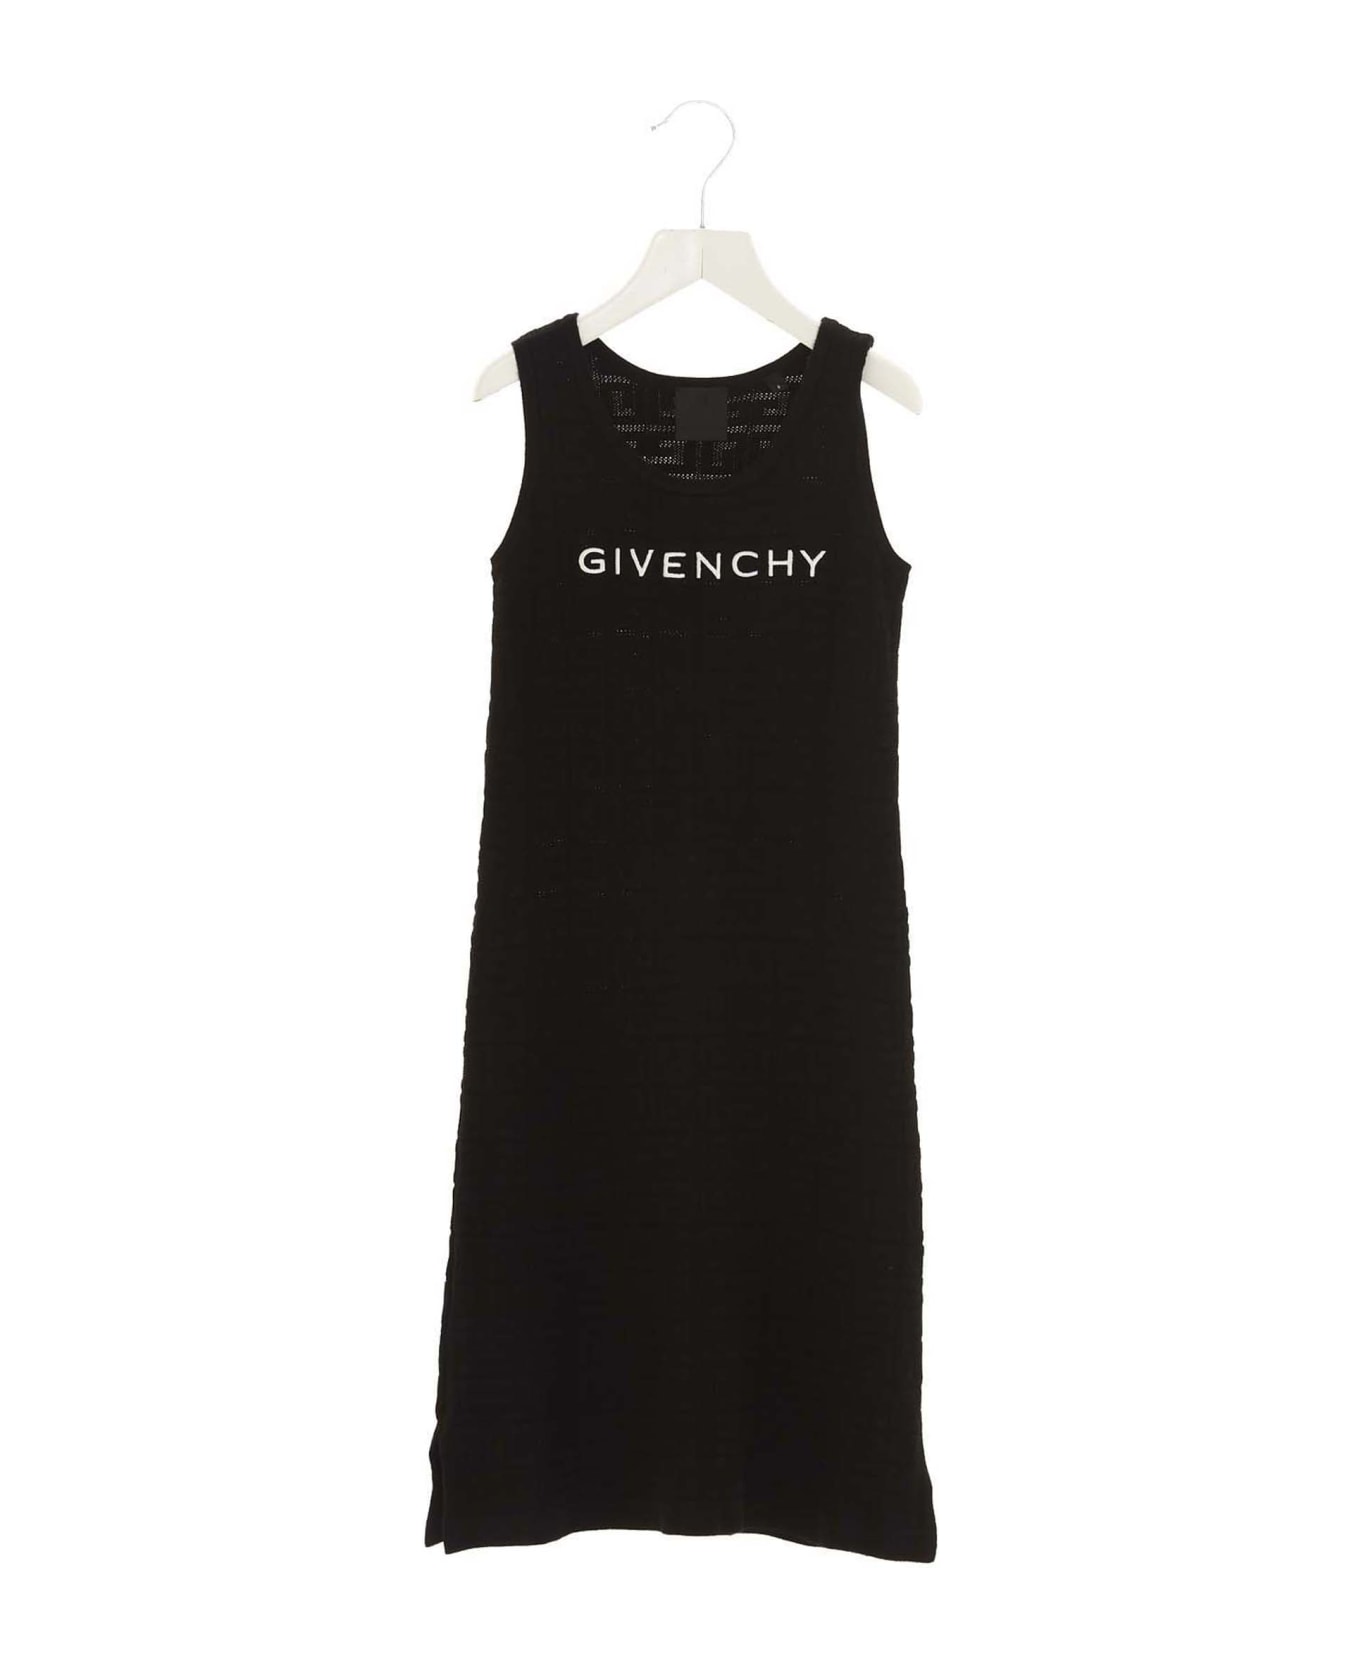 Givenchy Embroidered Logo Dress - Black  